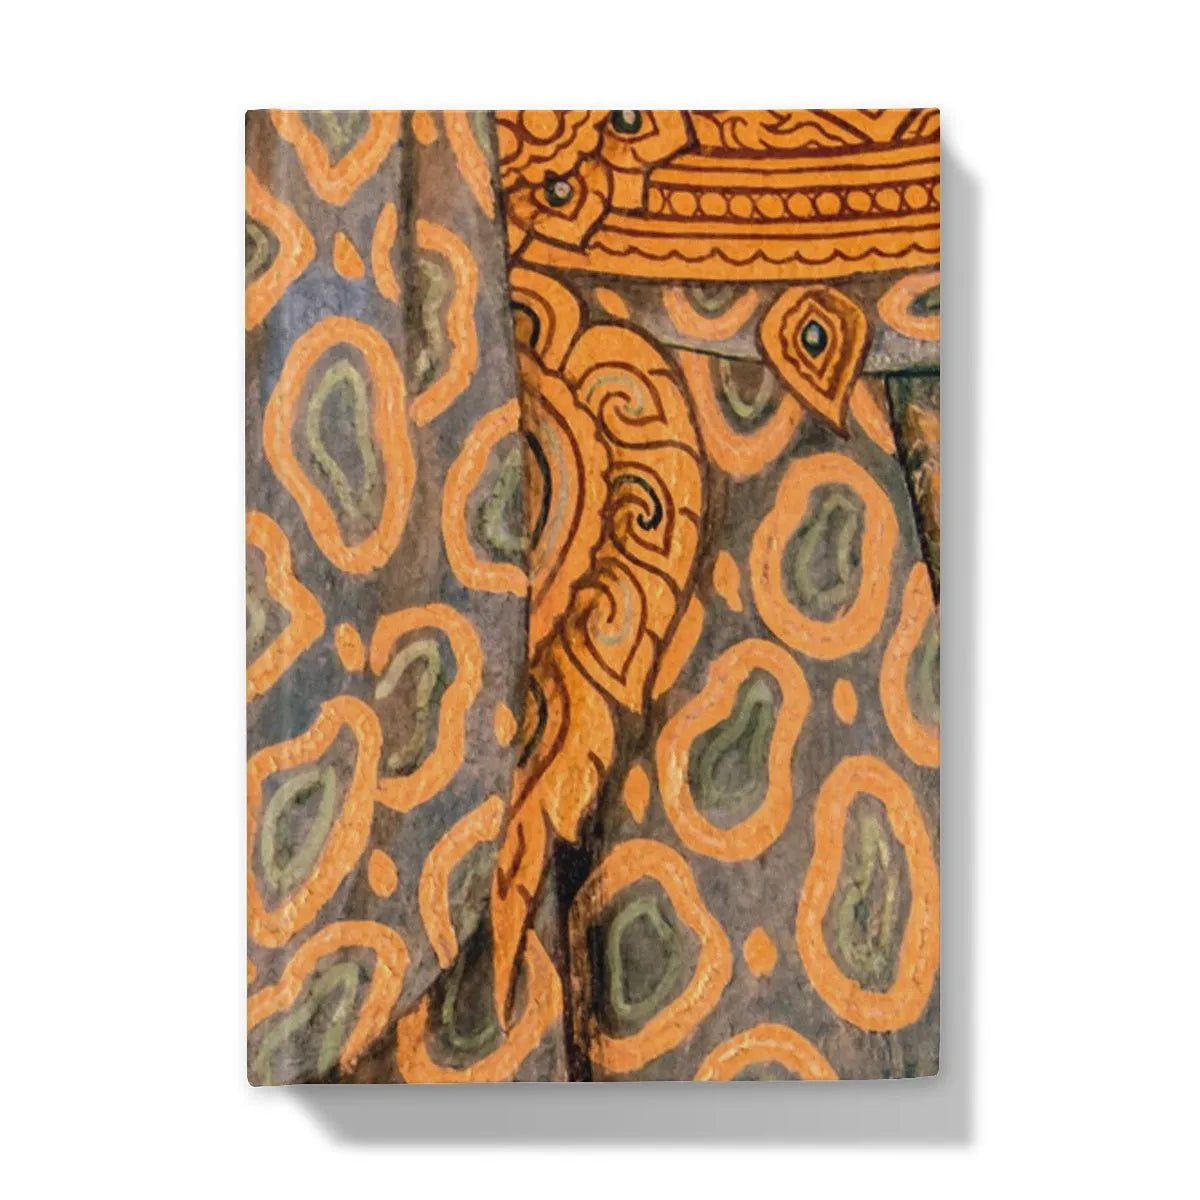 Lady In Waiting Hardback Journal - Royal Siam Thai Mural - 5’x7’ / 5’ x 7’ - Lined Paper - Notebooks & Notepads